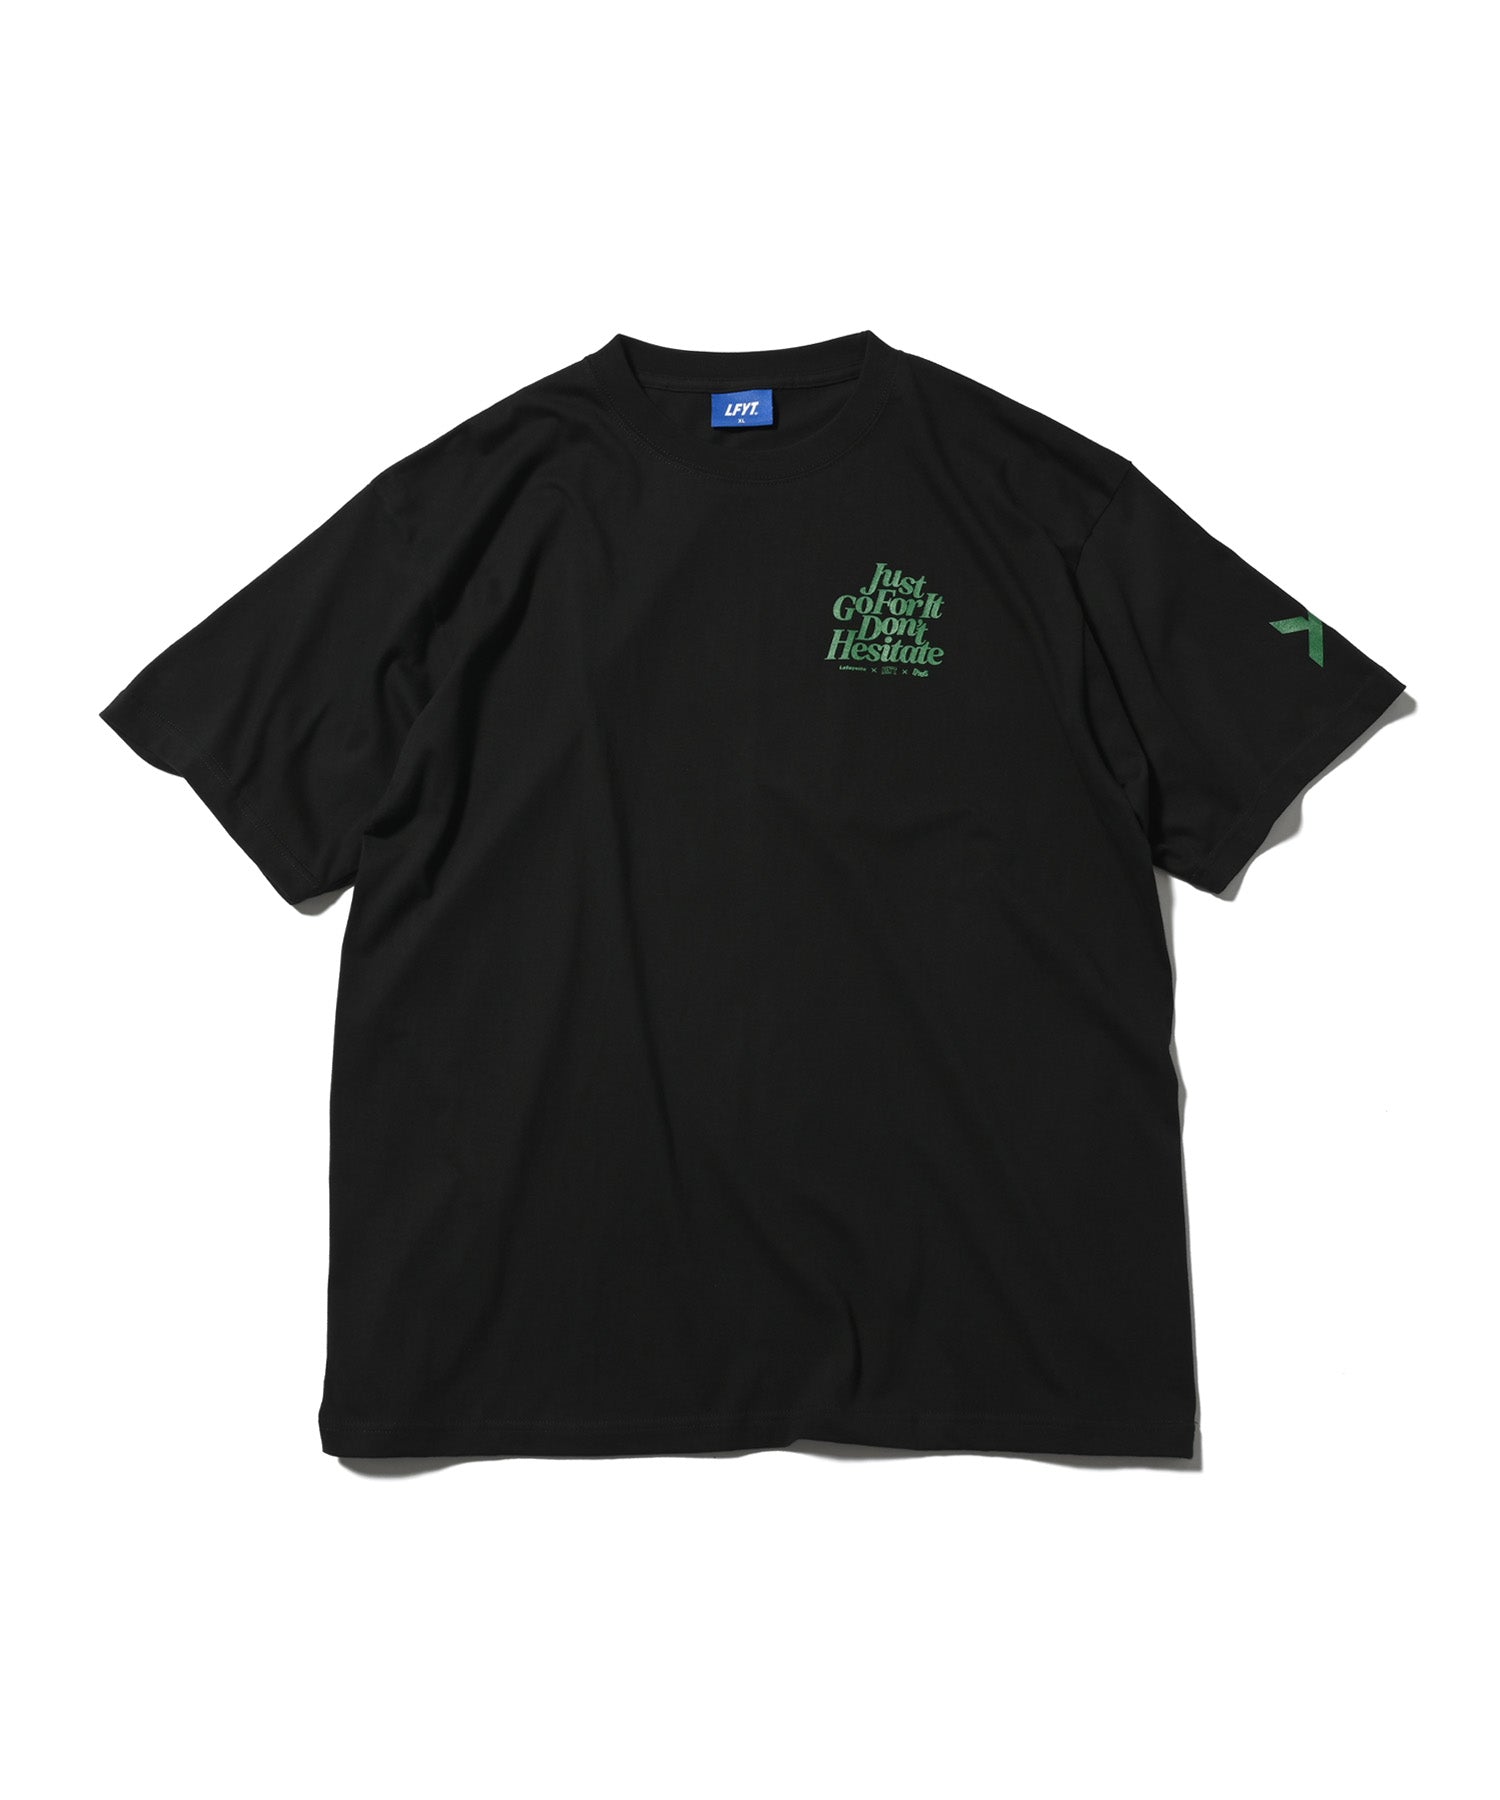 StockX x The Daps x Ain't Easy Nyc x LFYT - JUST GO FOR IT TEE LE230151